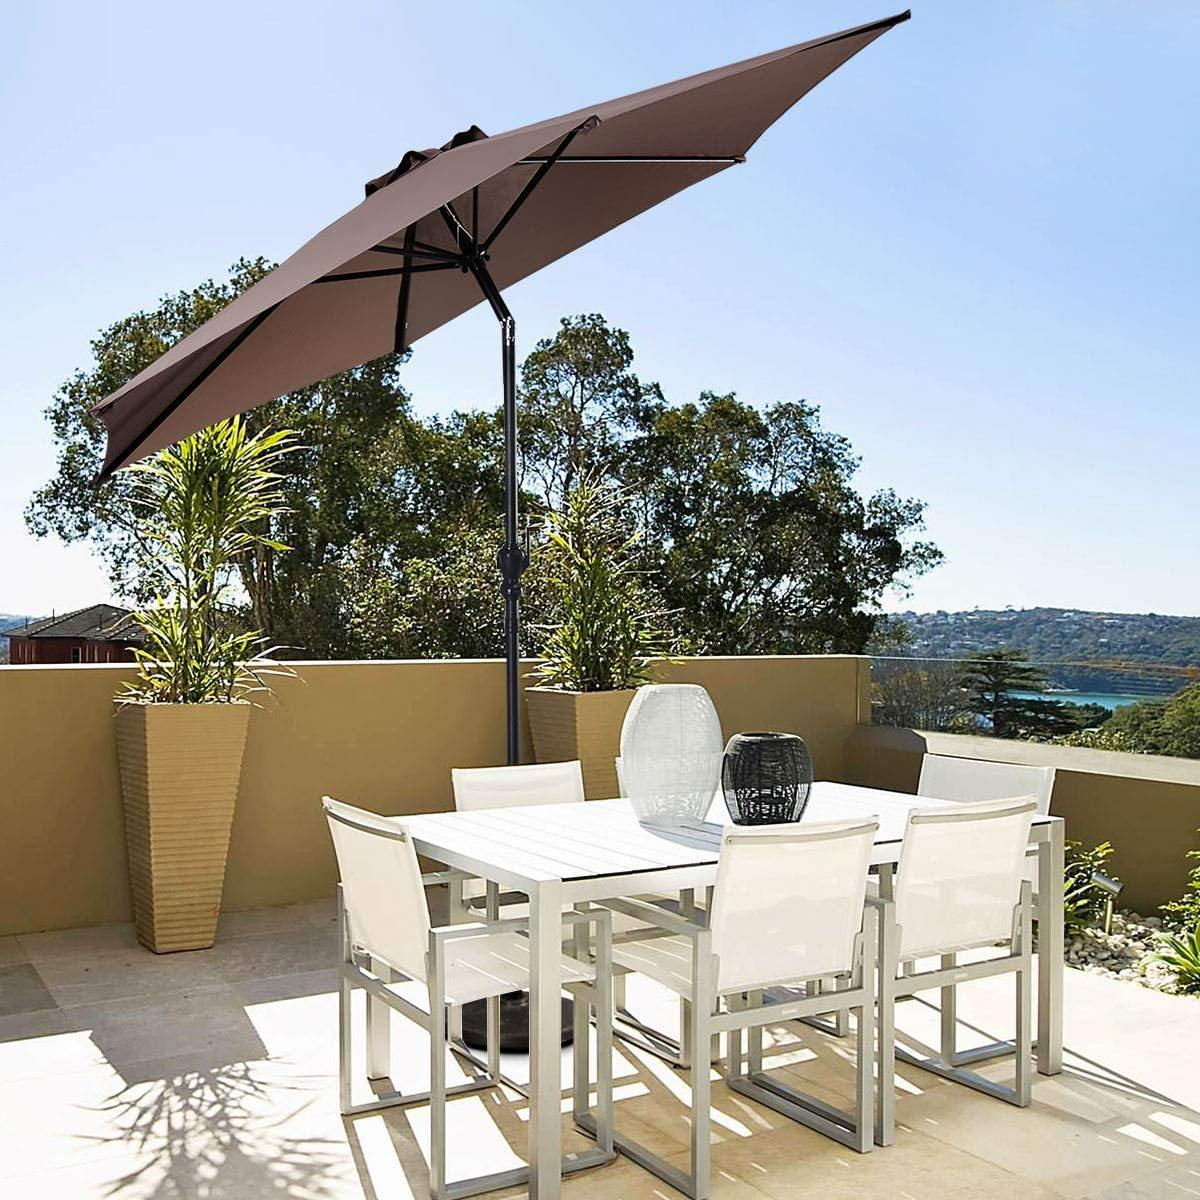 6 FAQs And Troubleshooting About the Outdoor umbrella and the Base